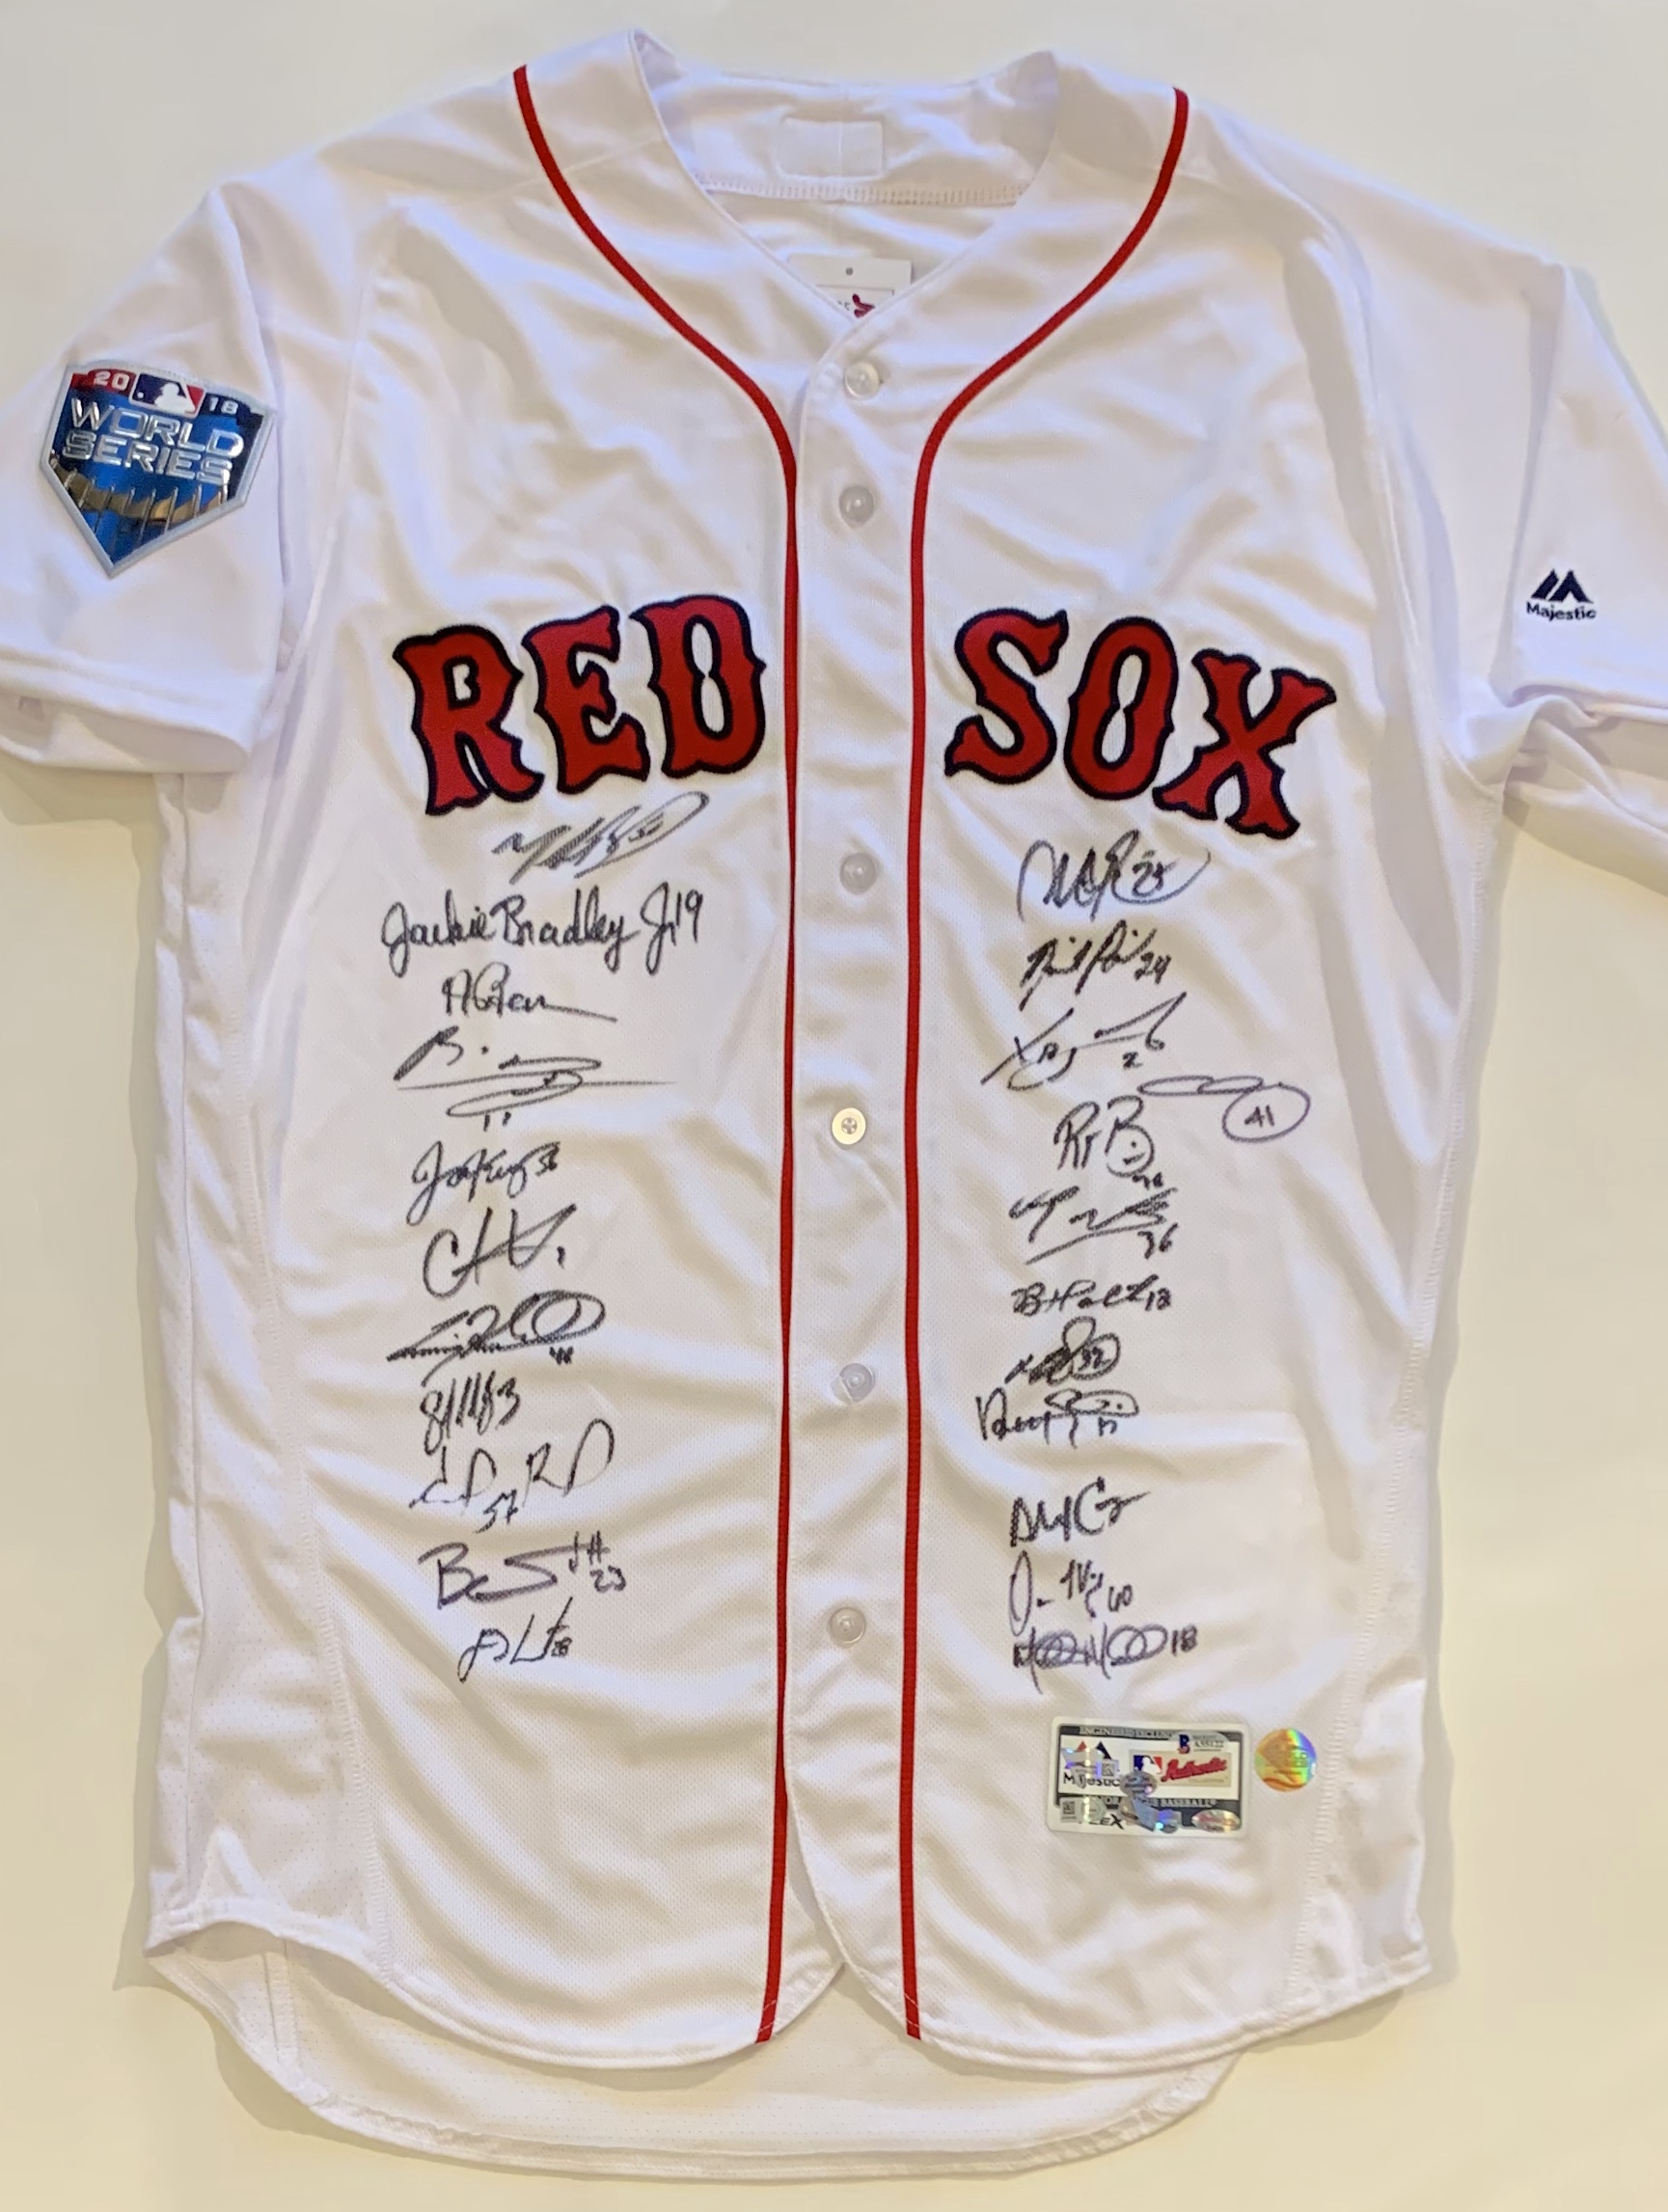 Boston Red Sox 2018 World Series Team Autographed Jersey - signed